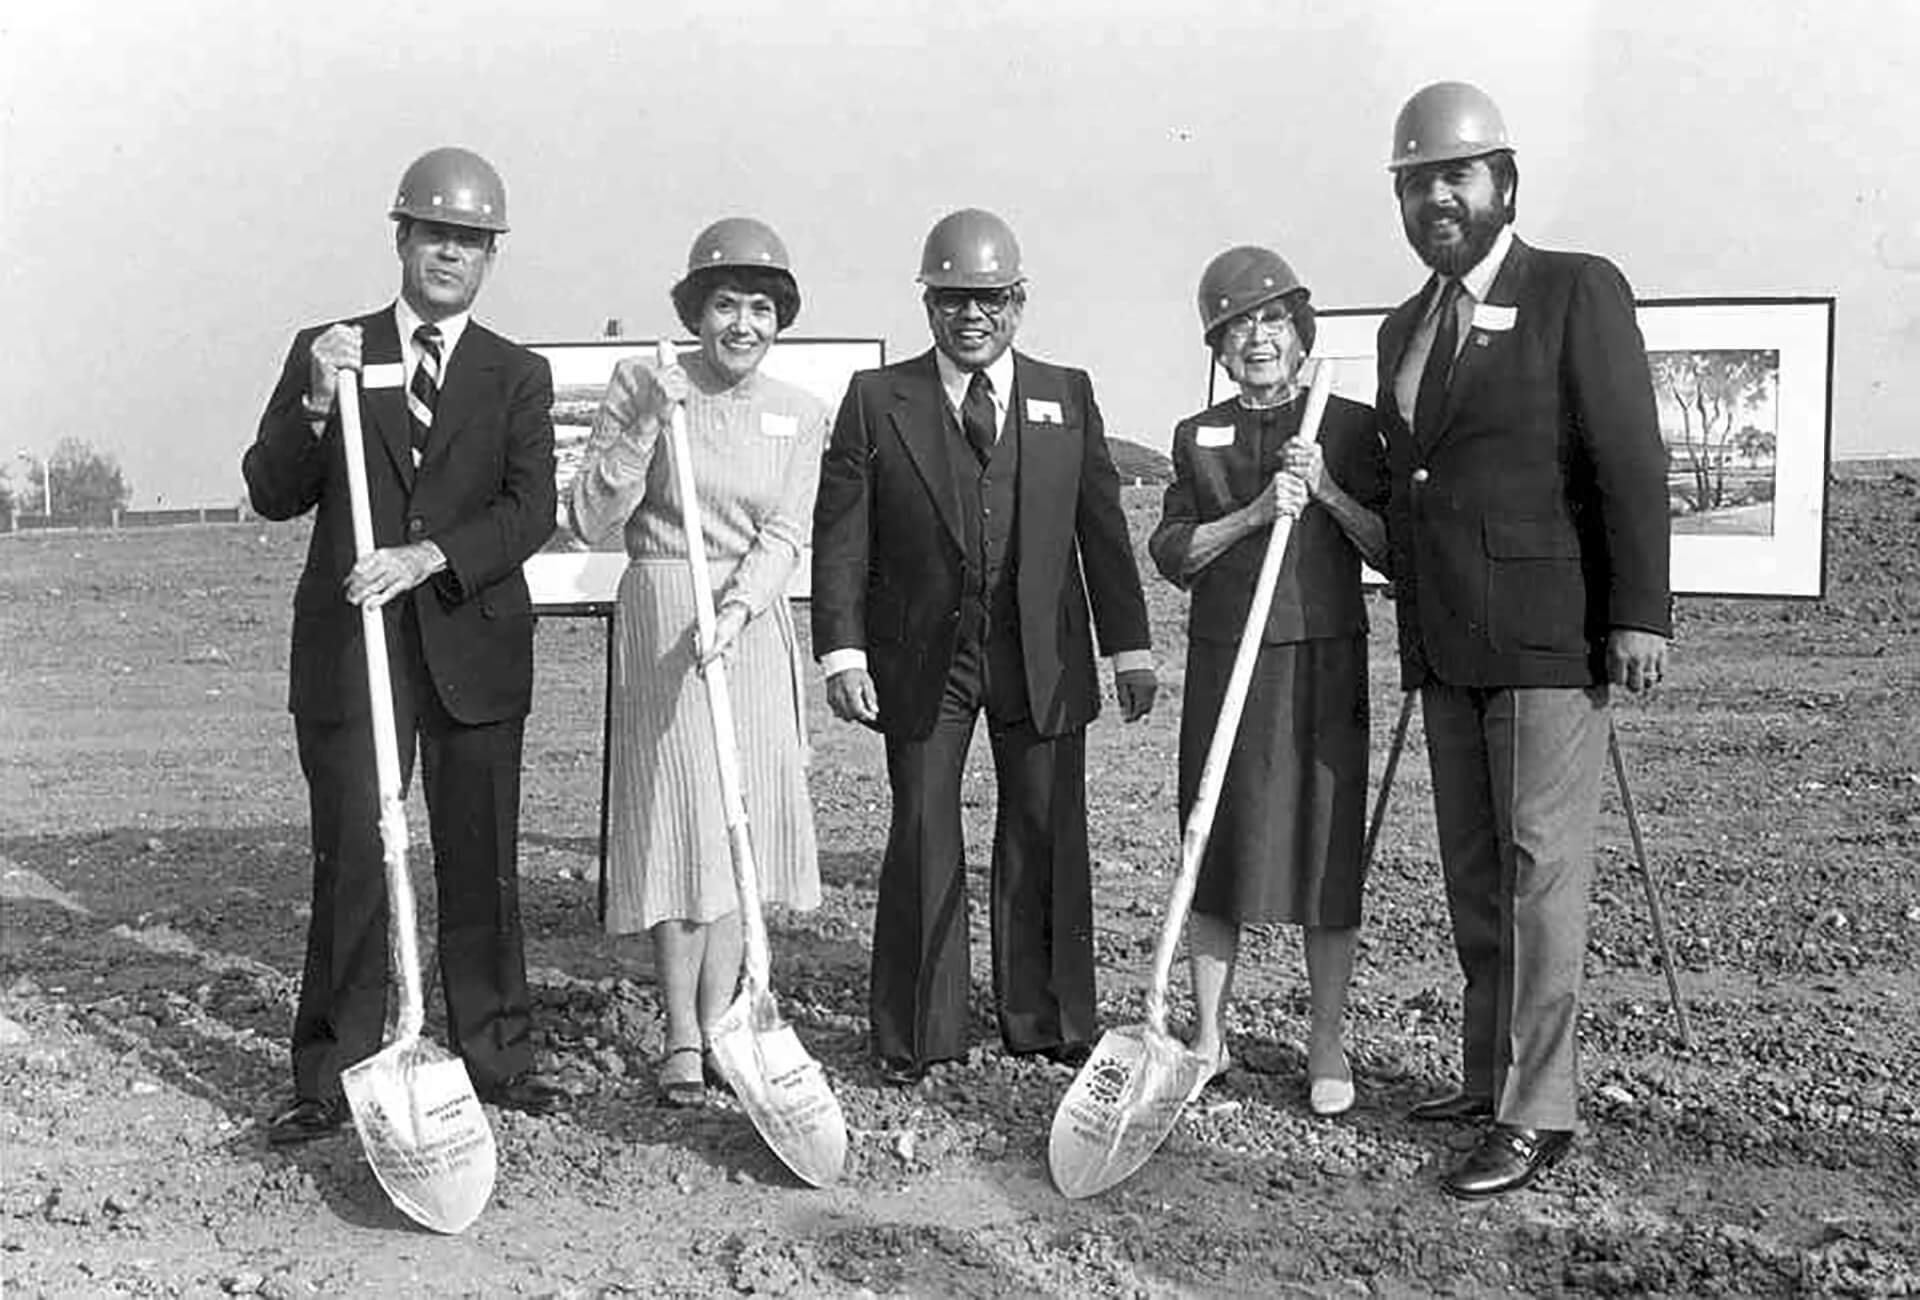 Two women and three men in hard hats and business clothes ceremonially pose with shovels at a groundbreaking event